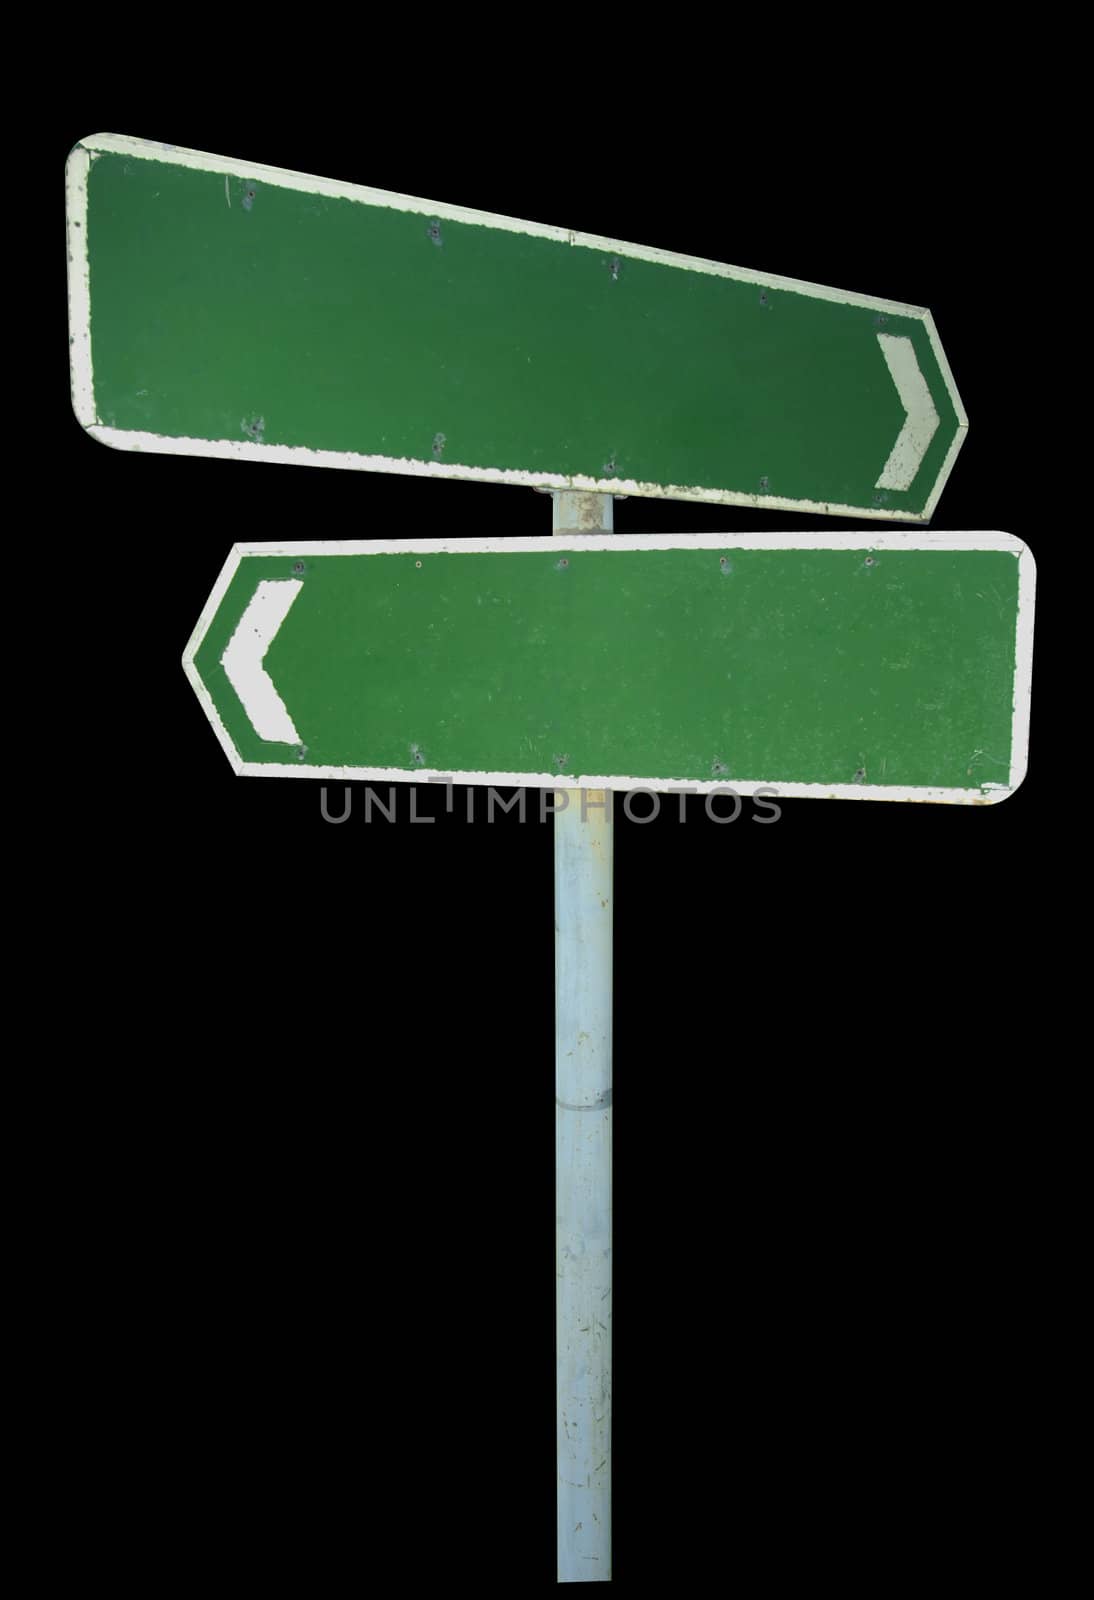 Two blank signboards, pointing in opposite directions, on a black background. Clipping path included so signs can be placed on any background.